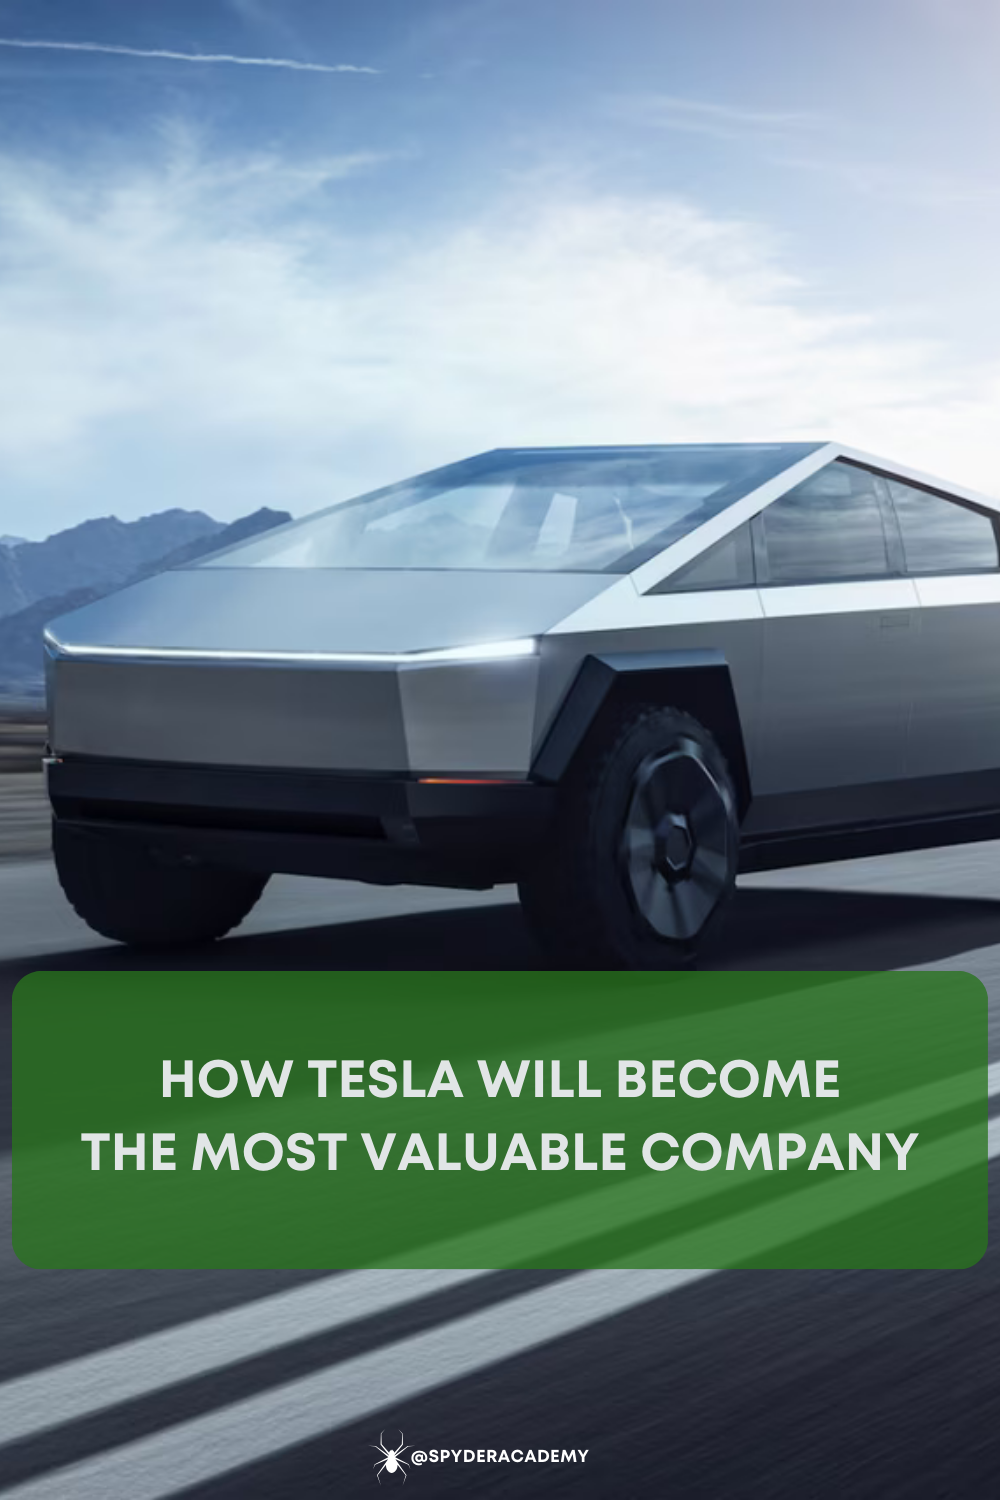 Explore the dynamic and intriguing journey of Tesla's stock in the market. From its highs and lows to its innovations and challenges, get an in-depth analysis of what influences Tesla's stock value and the future outlook.